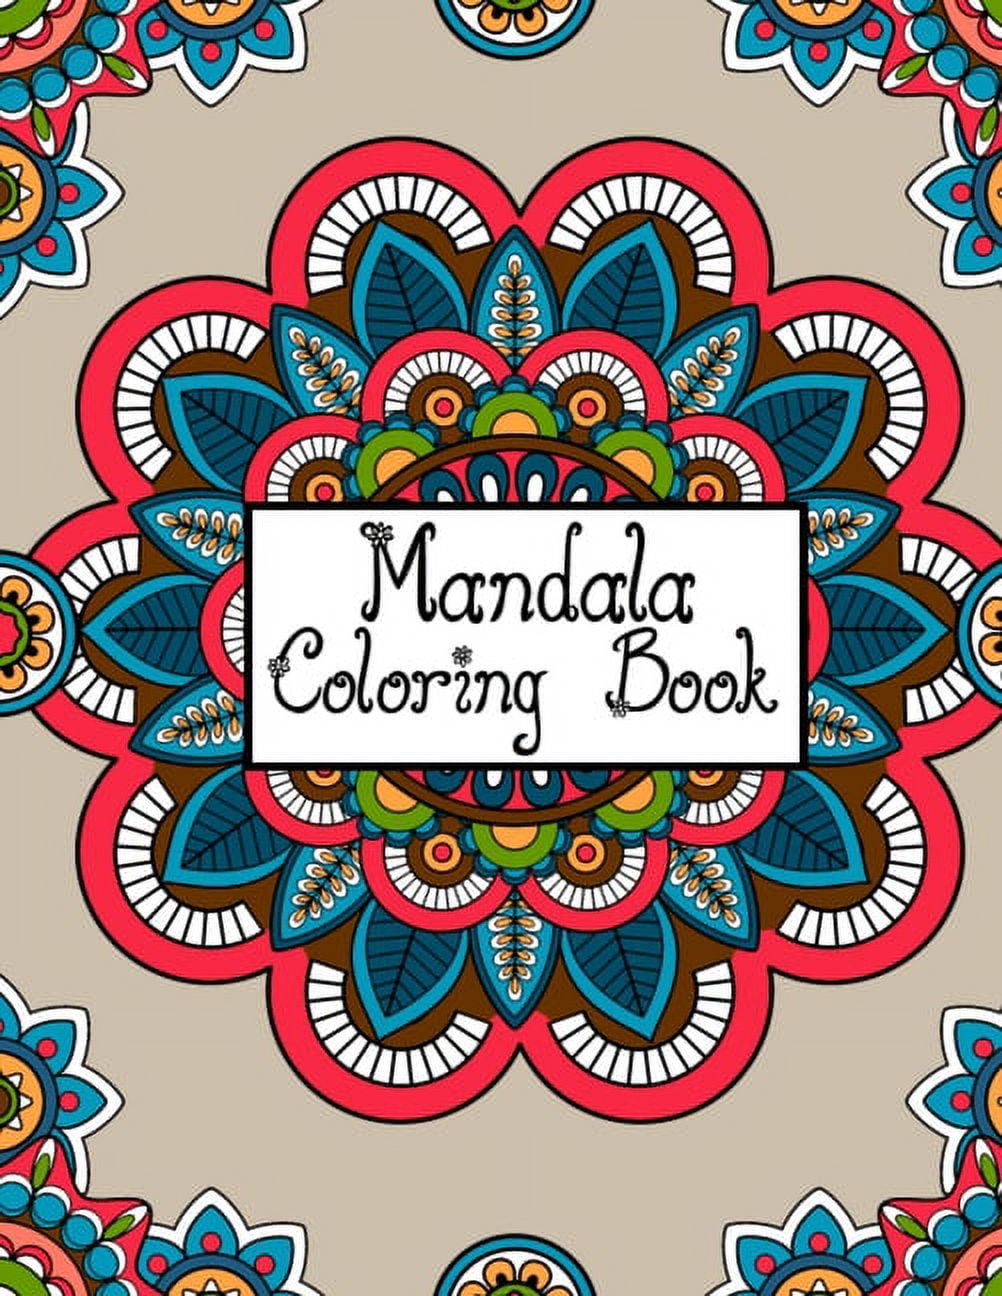 Mandala Coloring Book: Stress Relieving Designs, Mandalas, Flowers, 130  Amazing Patterns: Coloring Book For Adults Relaxation (Paperback)